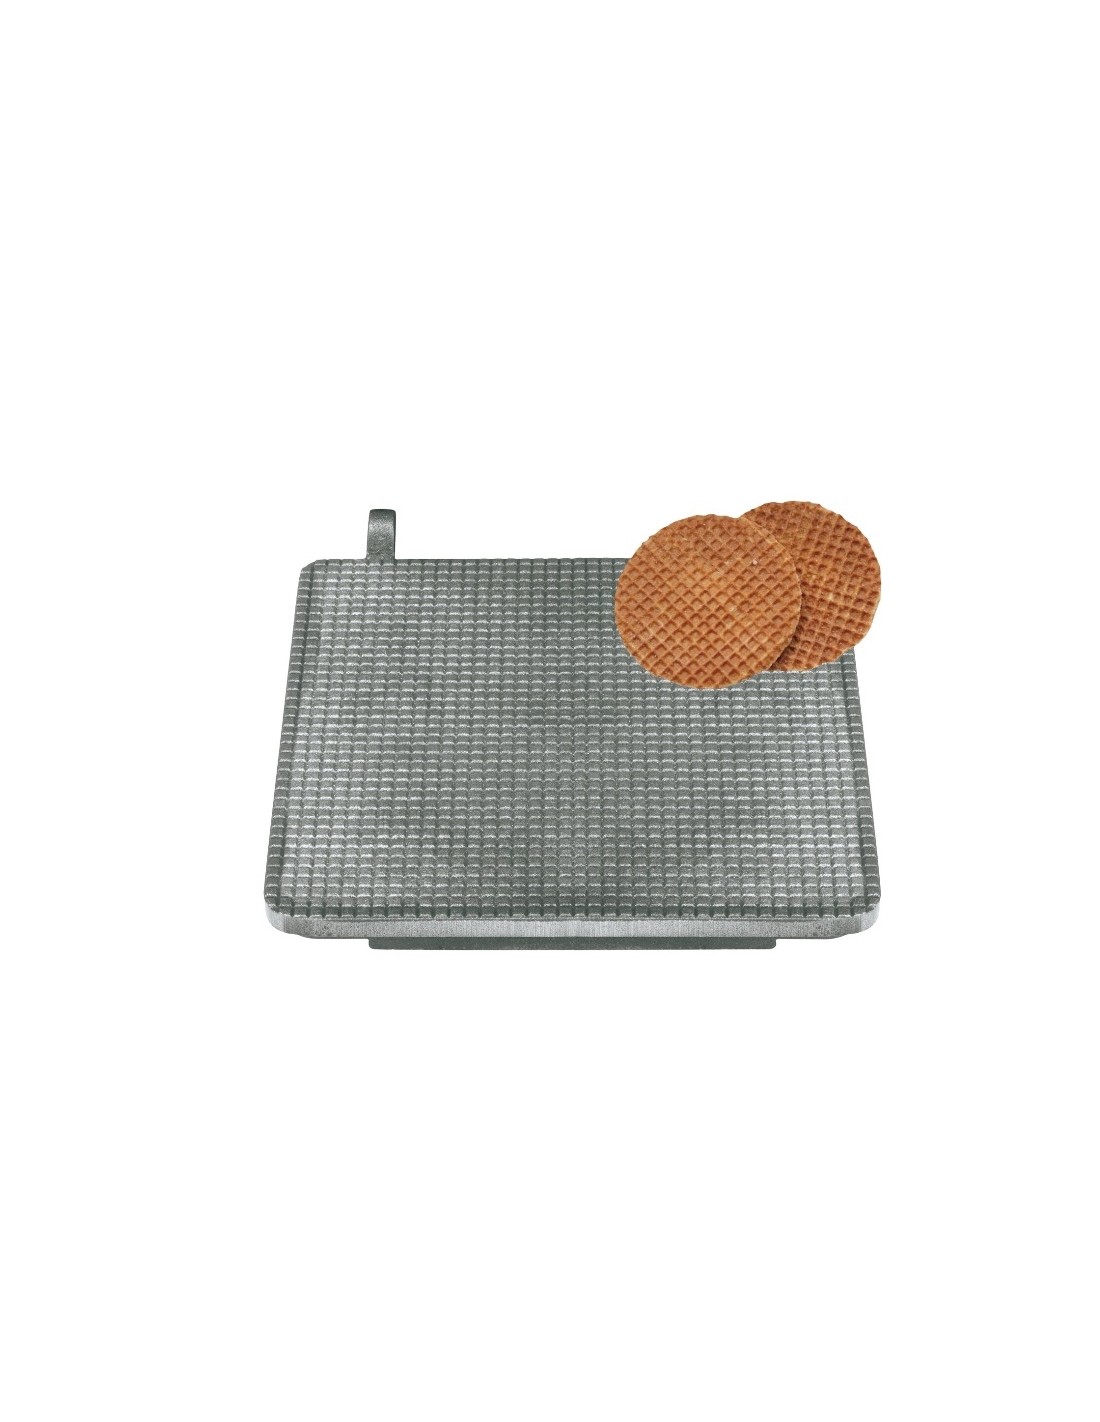 Interchangeable waffel plate - SHAPE: 1 waffel waffle 26x26 Cm - Usable for typical Dutch 'stroop' - cast iron